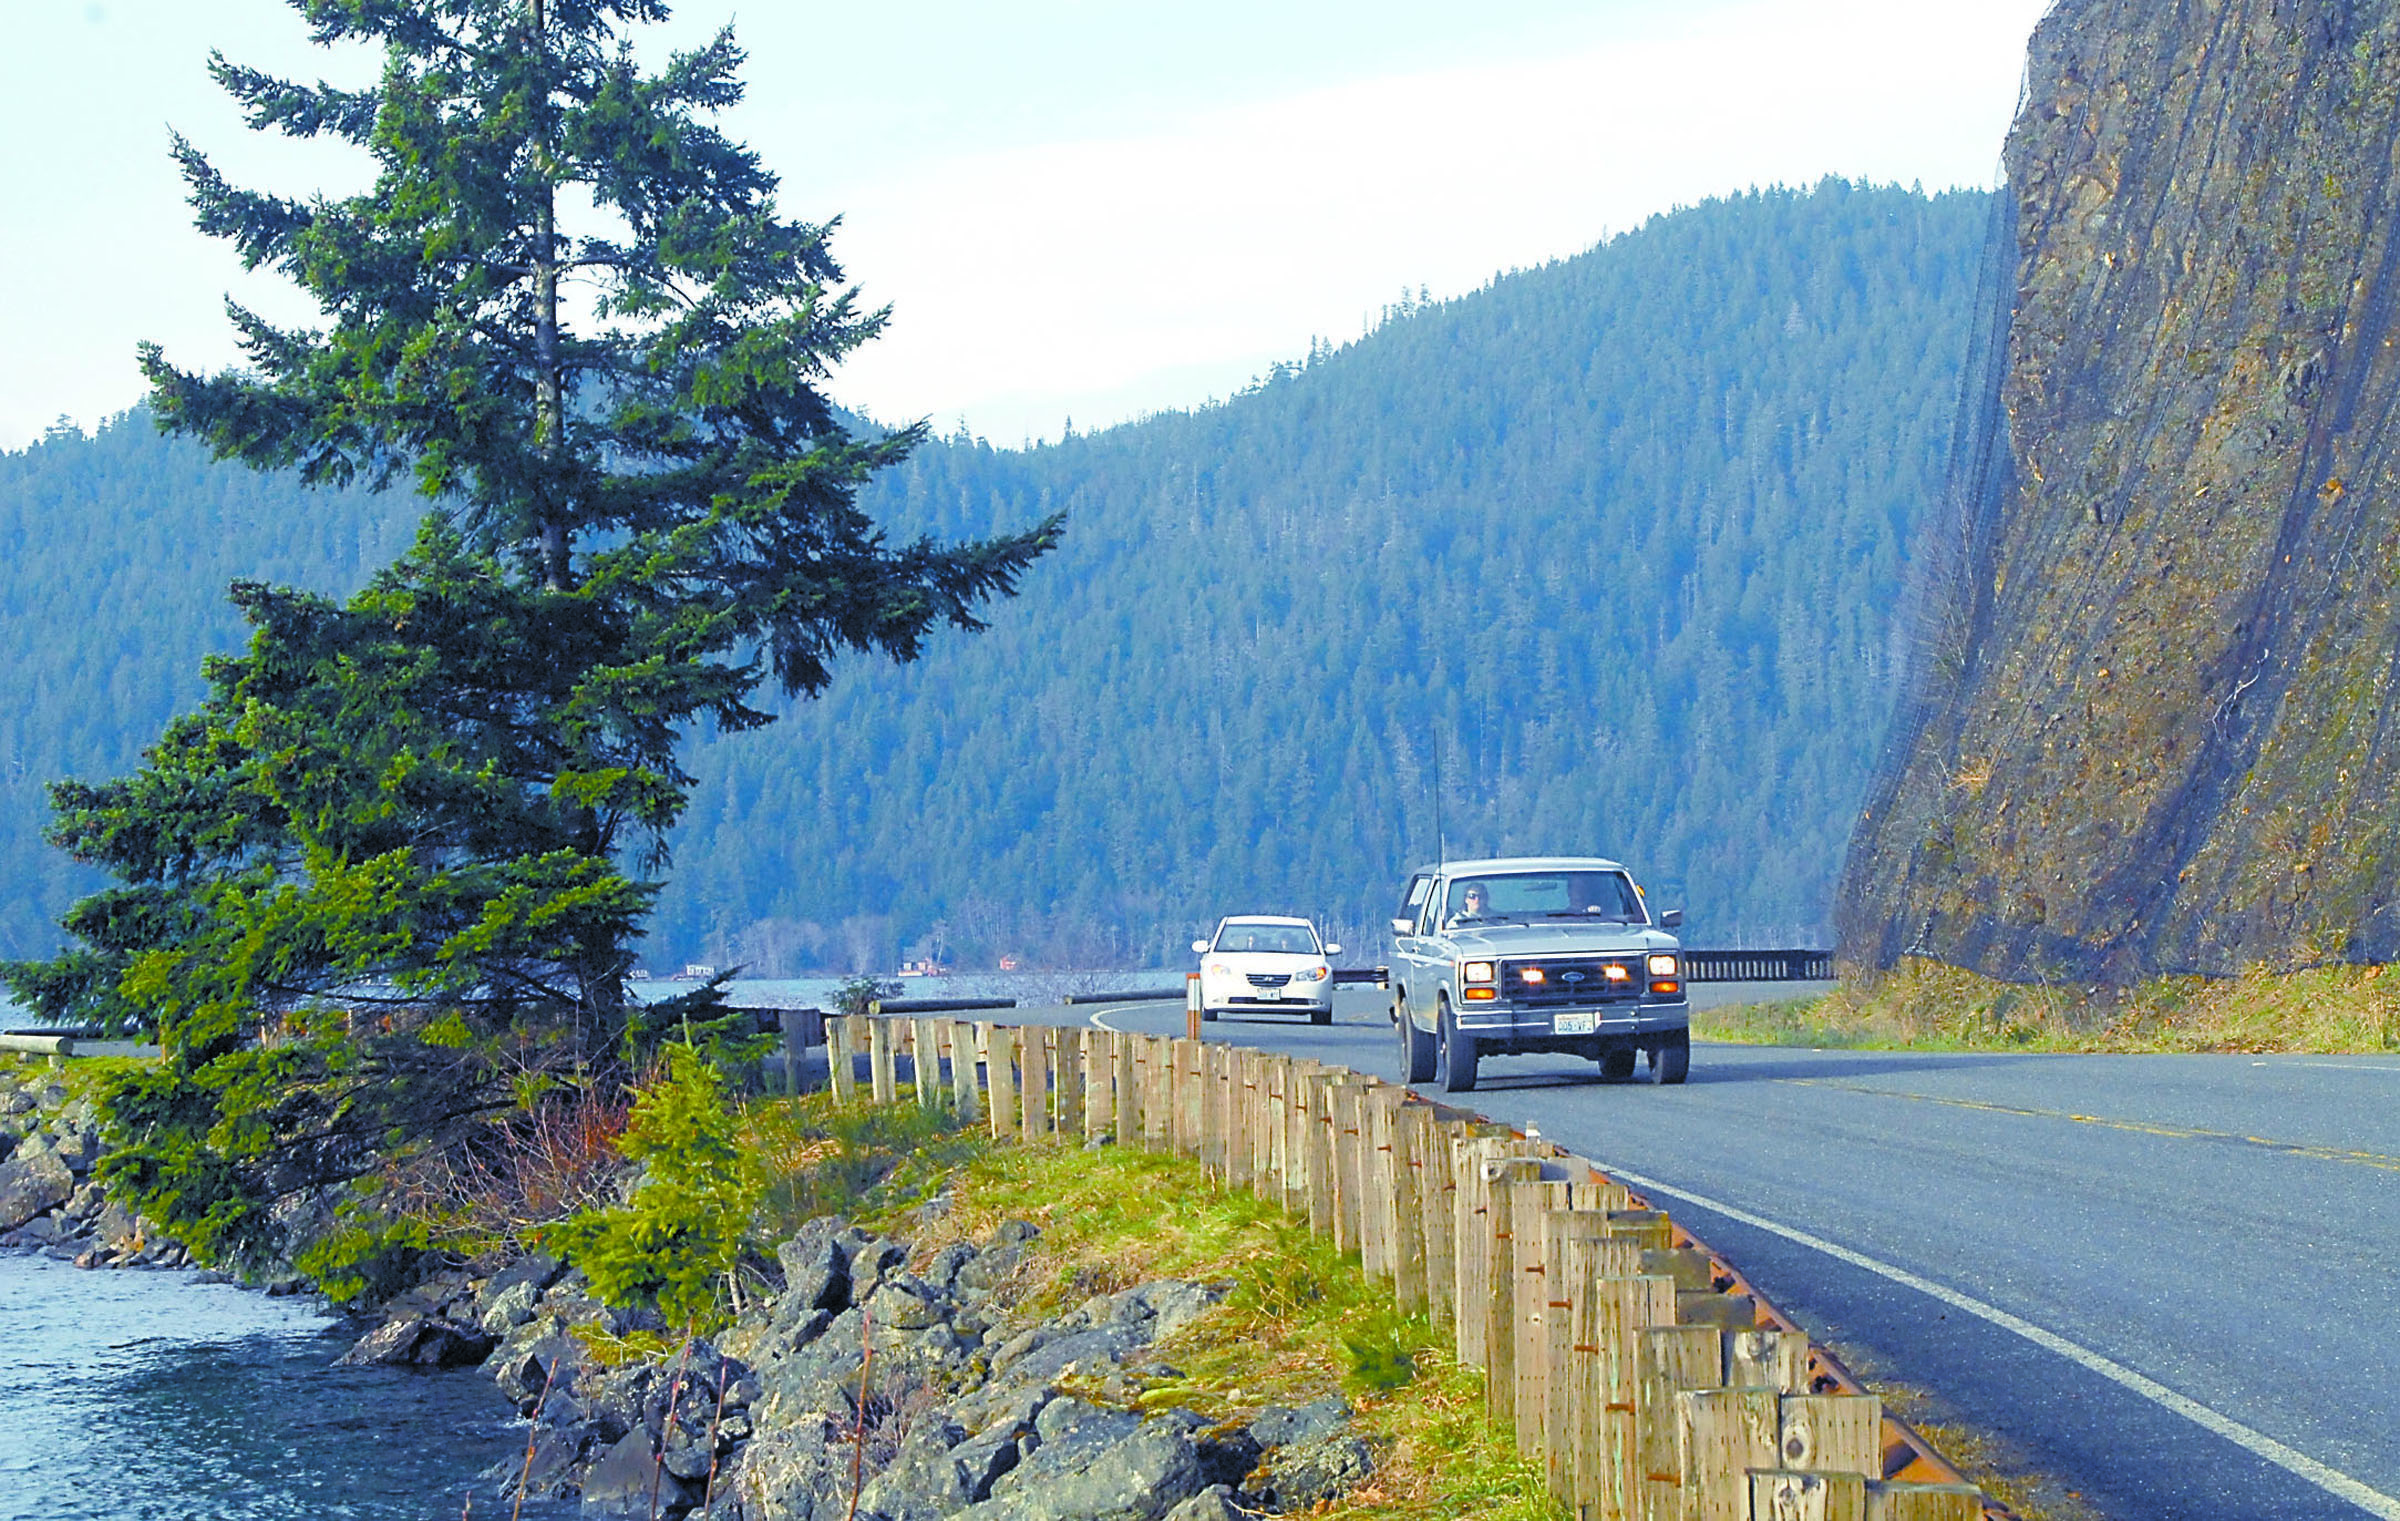 Public comment will be taken through April 30 on plans for the rehabilitation of U.S. Highway 101 around Lake Crescent. (Keith Thorpe/Peninsula Daily News)